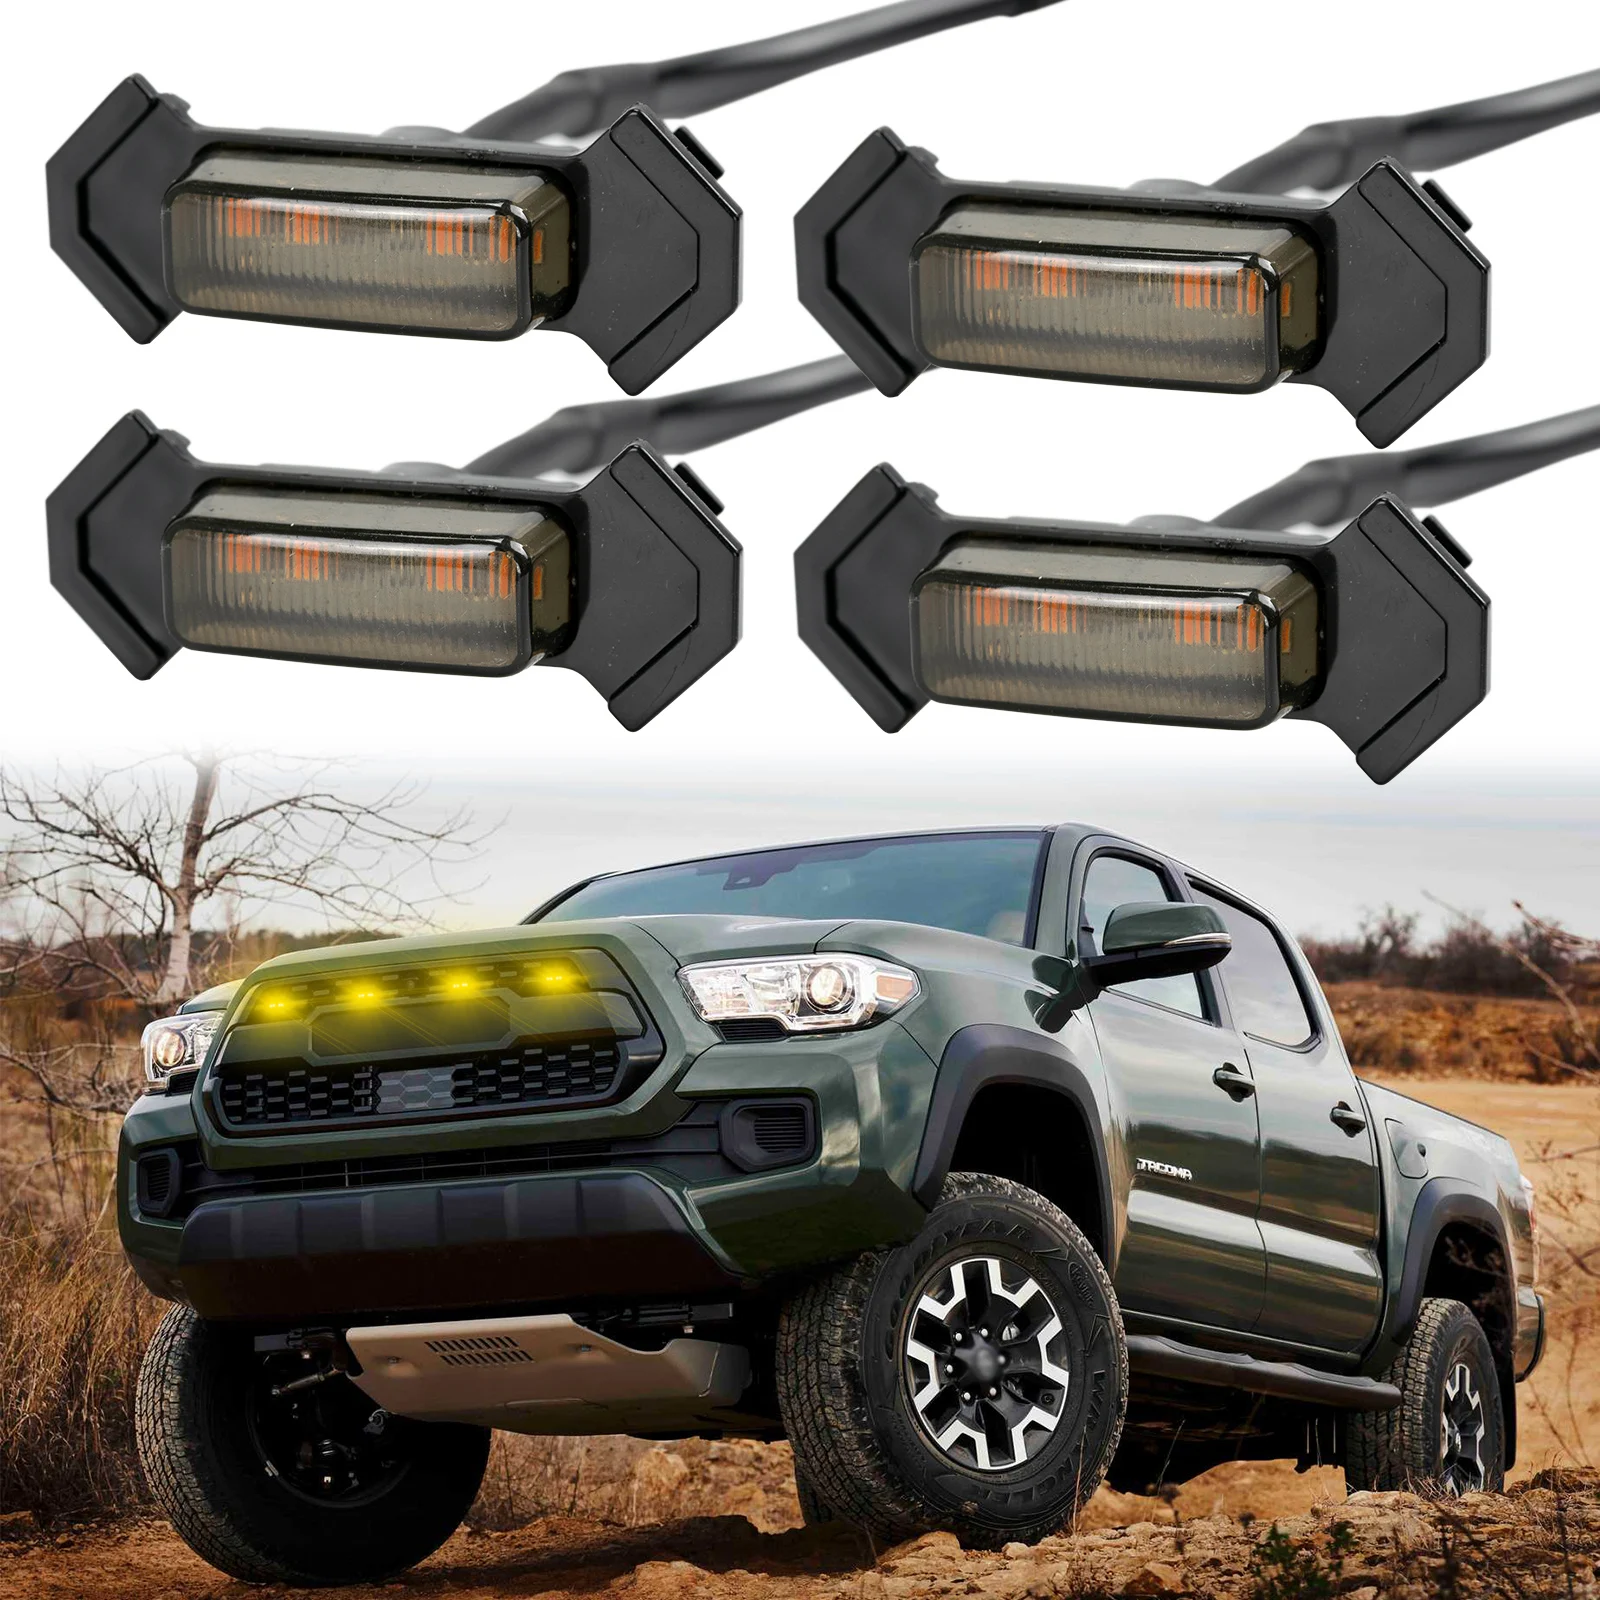 4Pcs Smoked Lens Amber LED 12v Grille Light For Ford F250 For Dodge Ram For GMC For Toyota Tacoma w/TRD Pro Grill Pickup SUV DIY